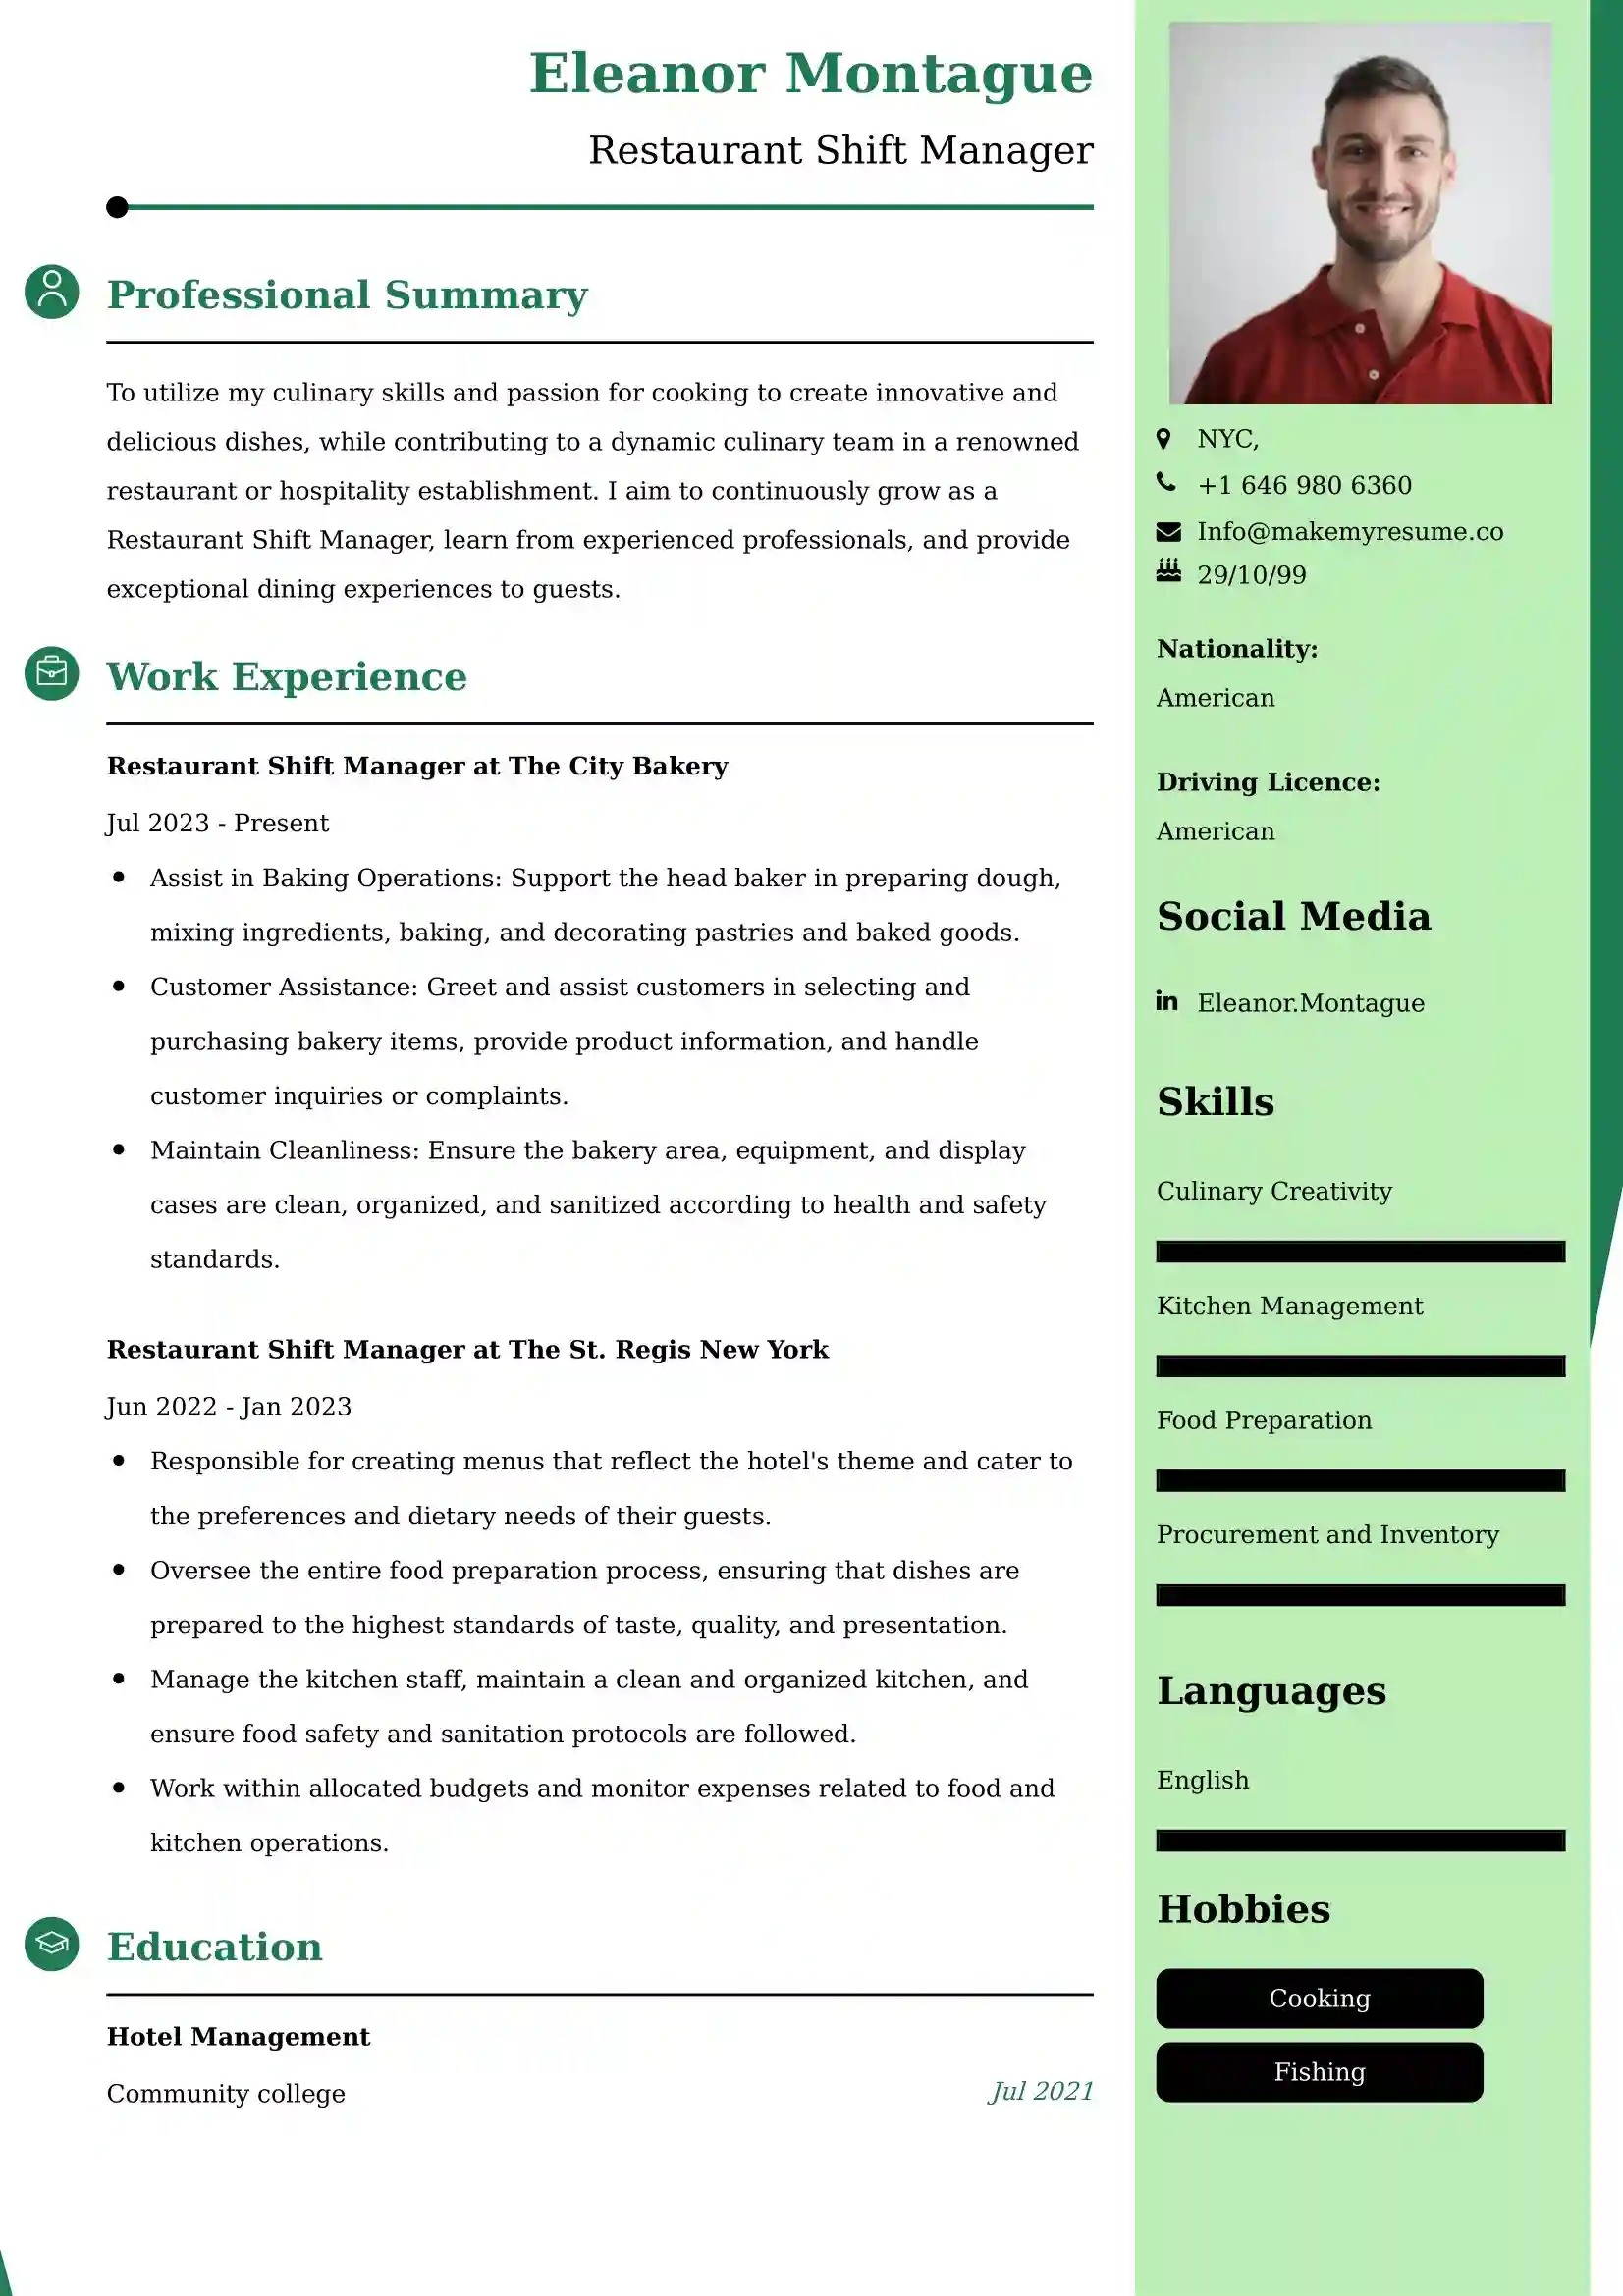 Restaurant Shift Manager Resume Examples - UK Format, Latest Template.